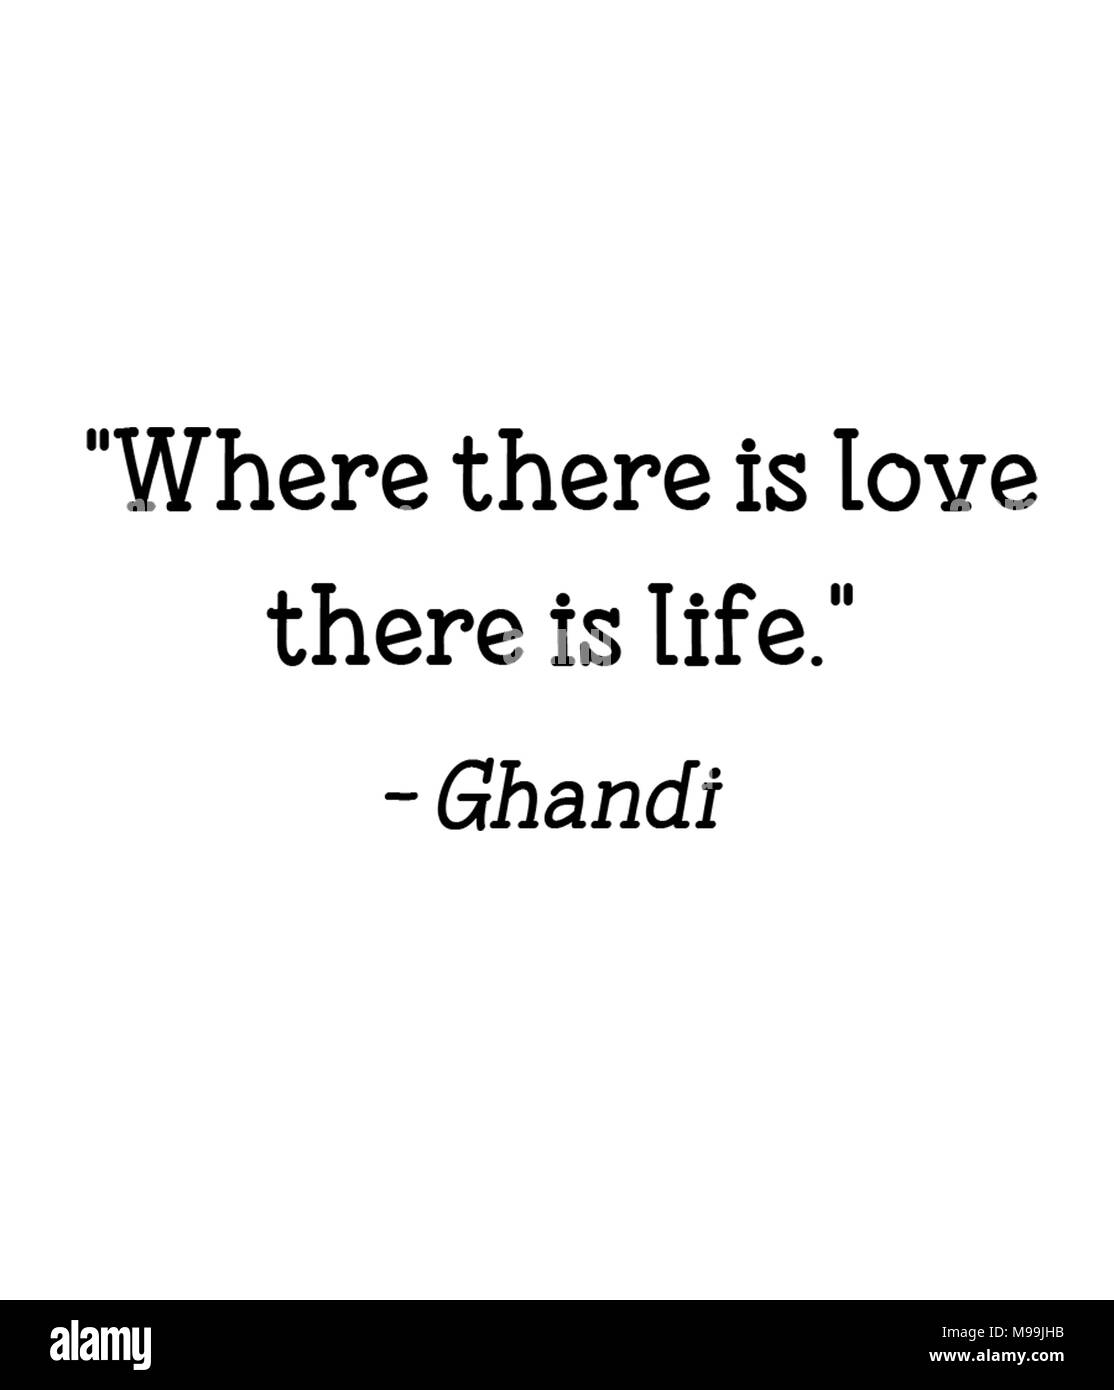 Where there is love there is life. - Ghandi Stock Photo